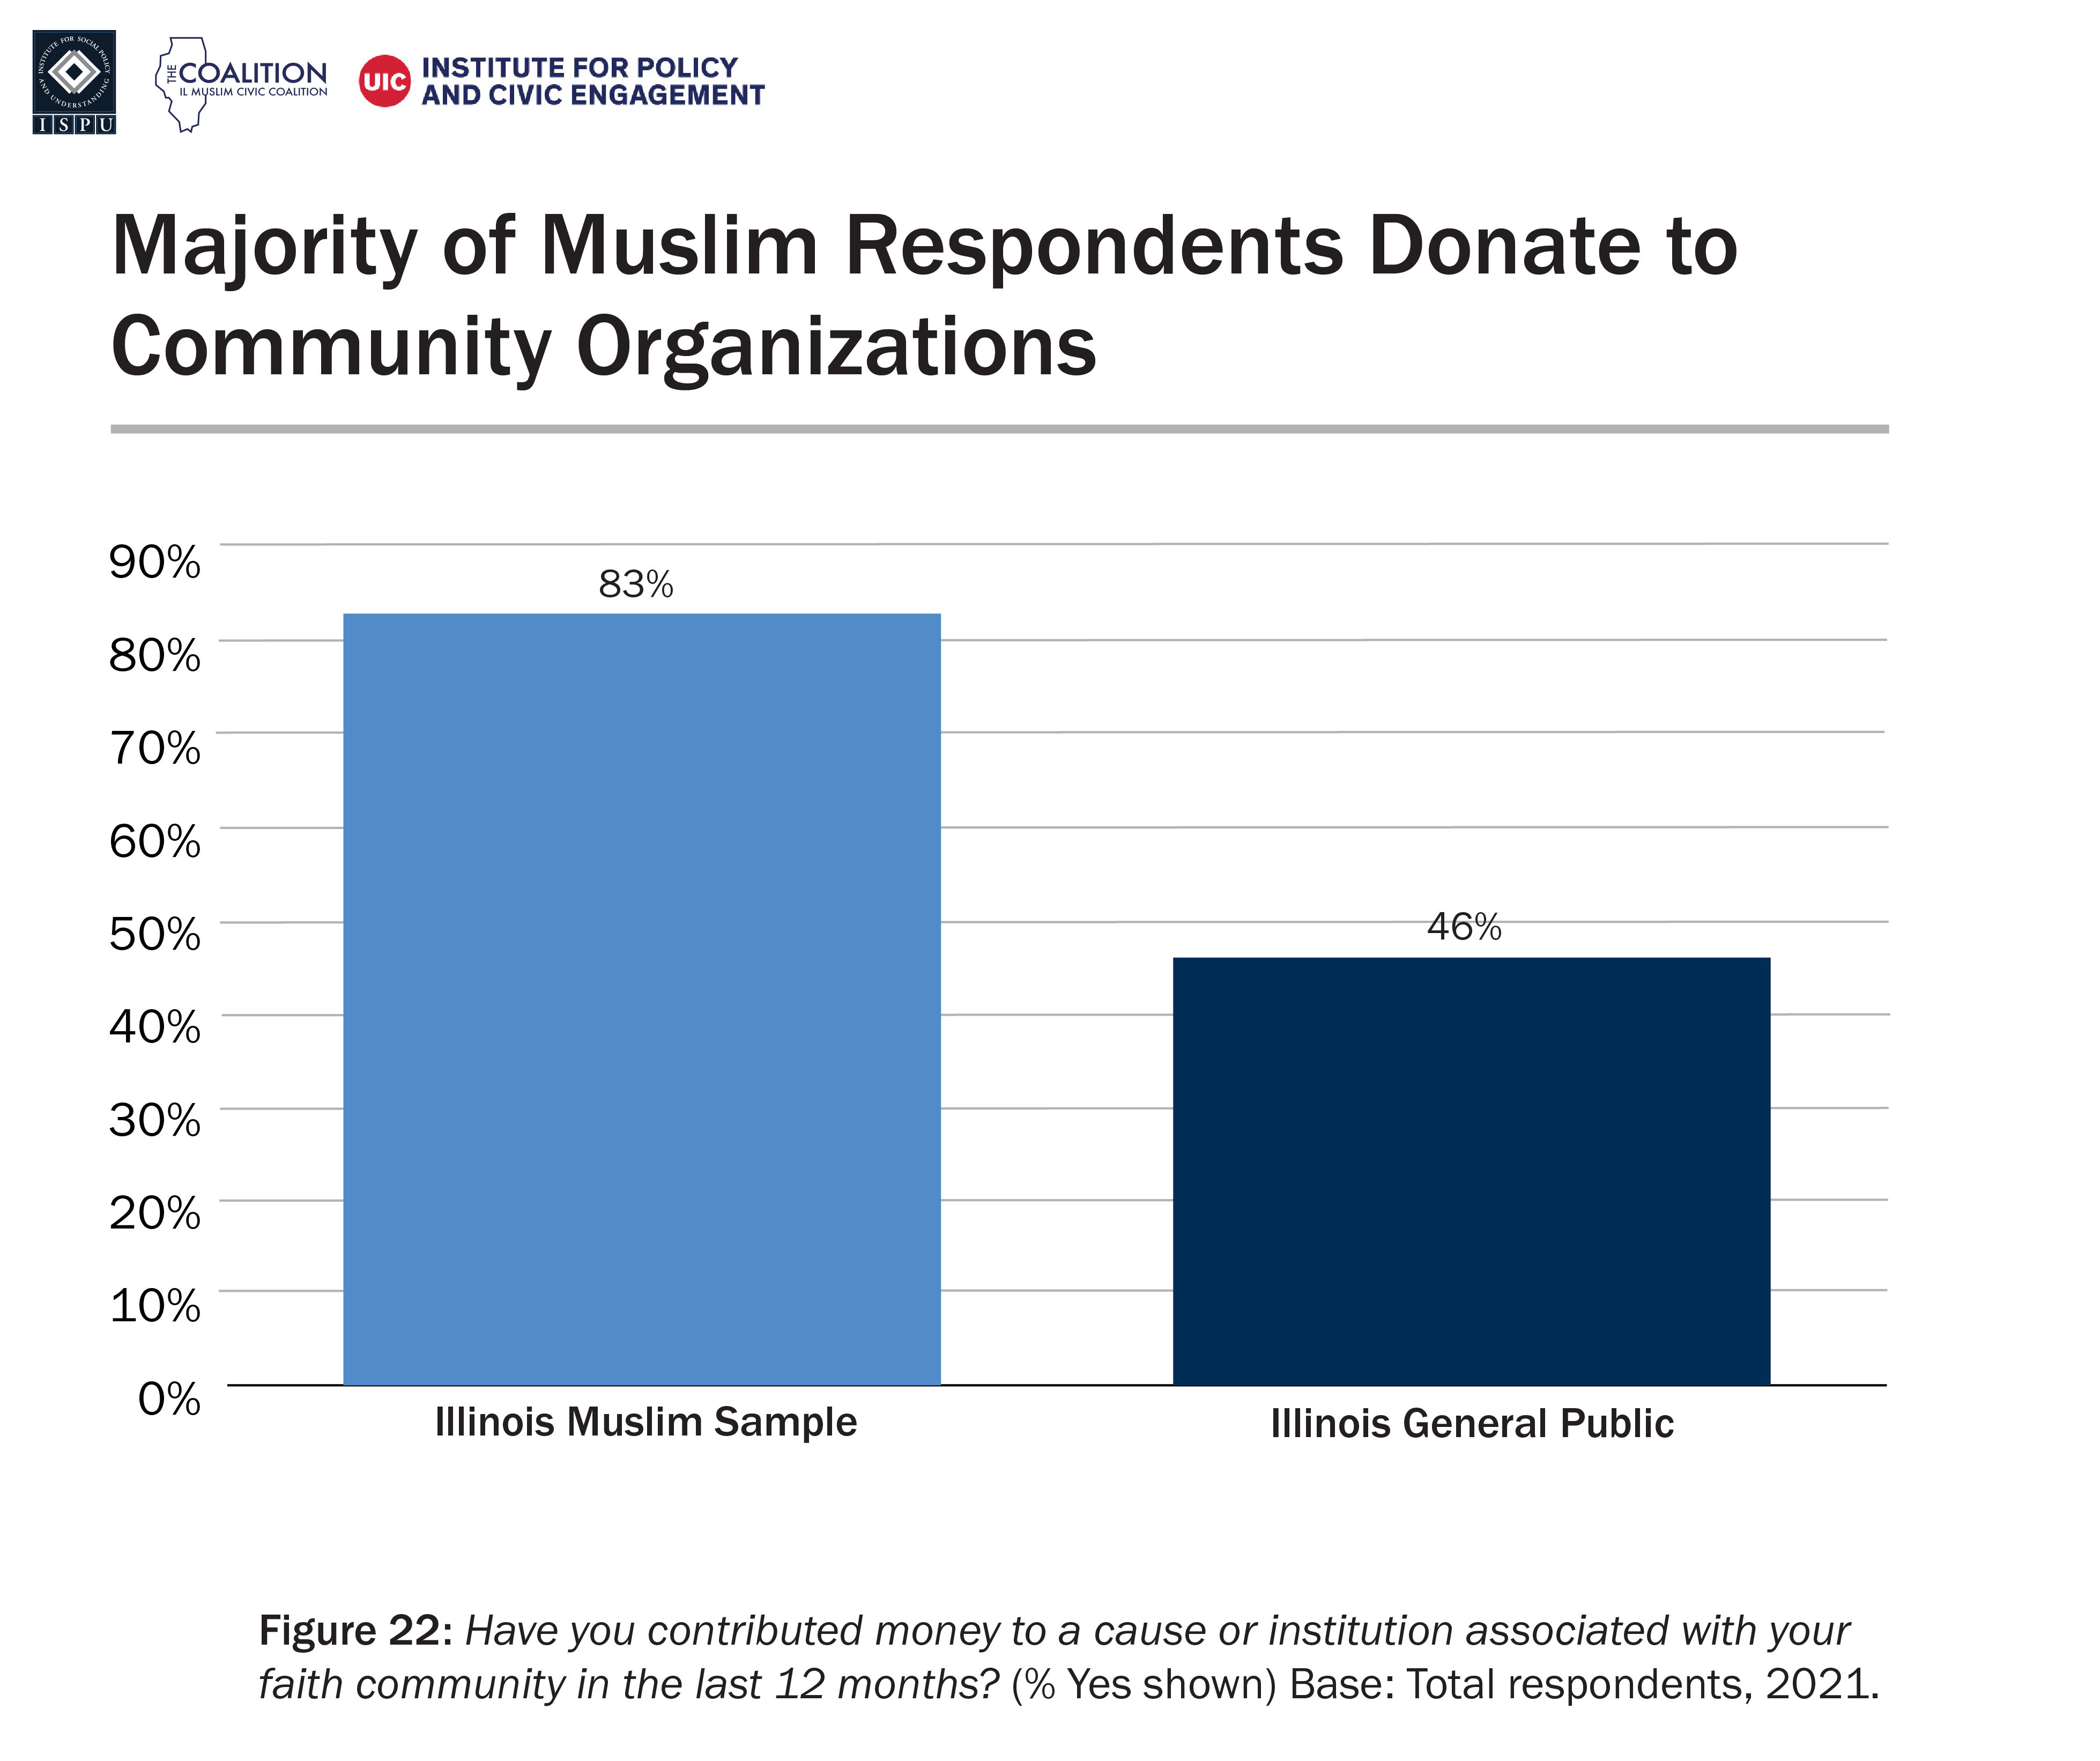 A bar graph showing the proportion of the Illinois Muslim sample and Illinois general public that donate to community organizations